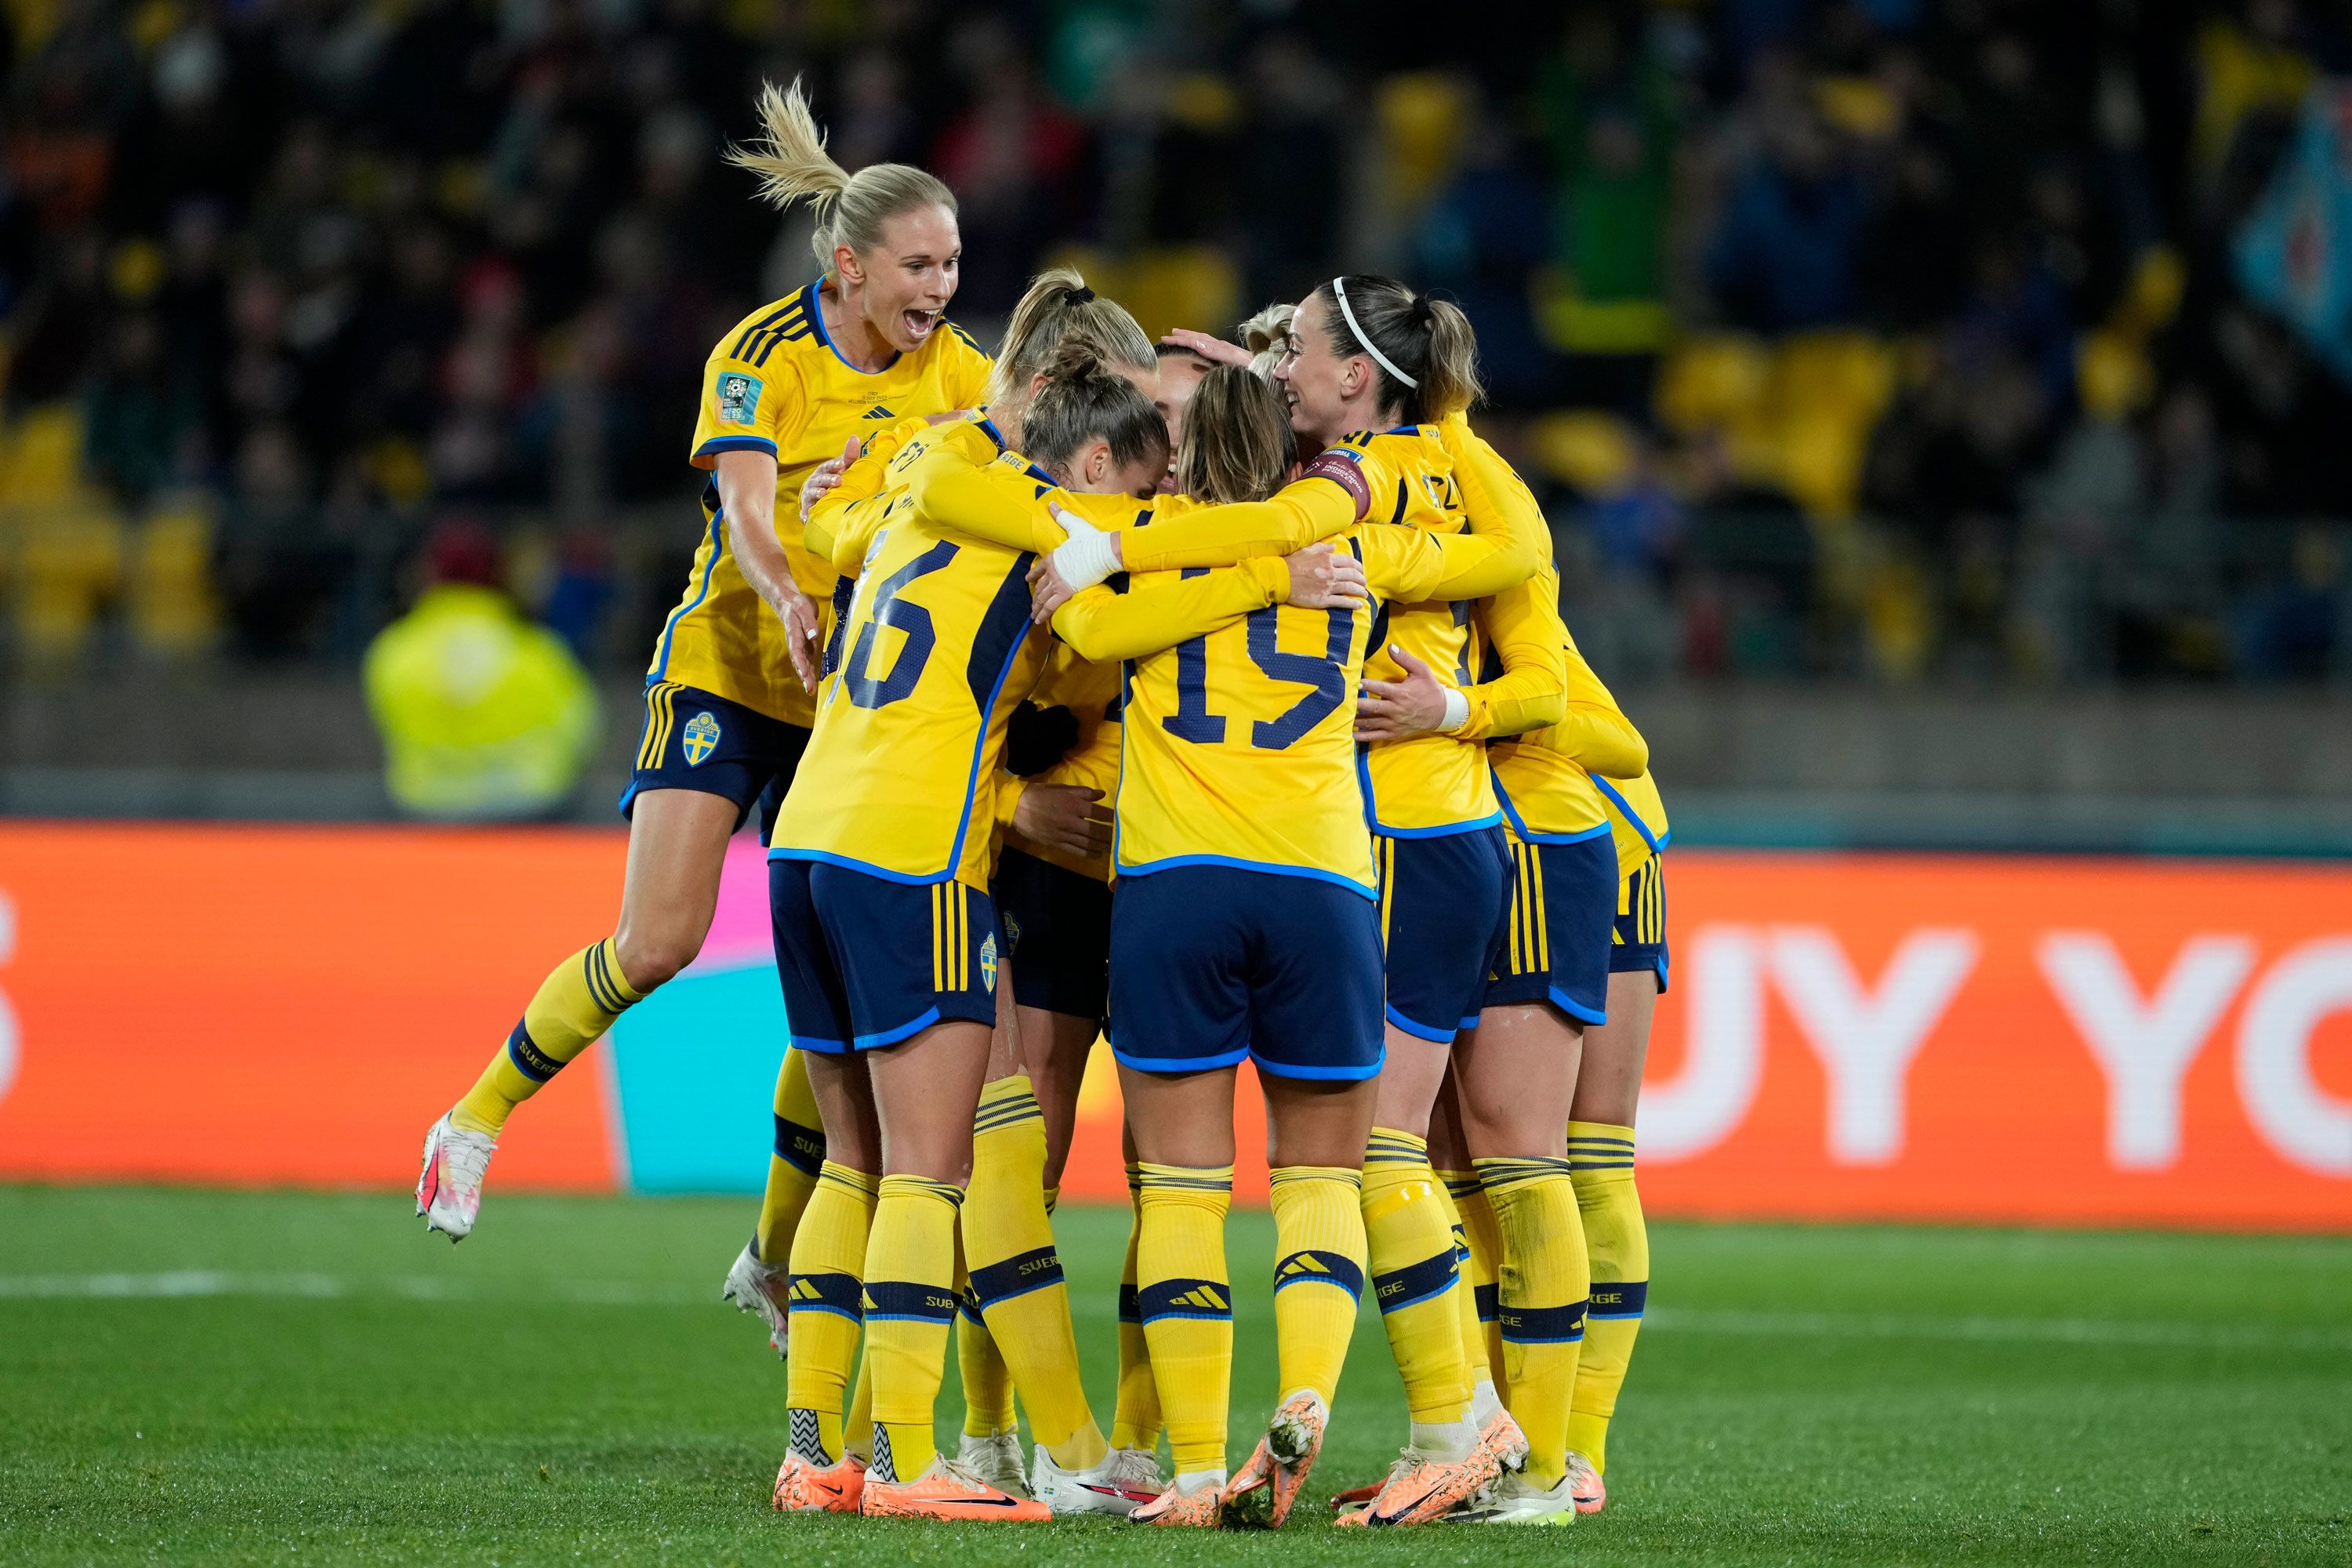 Group D Previews  FIFA Women's World Cup 2023™